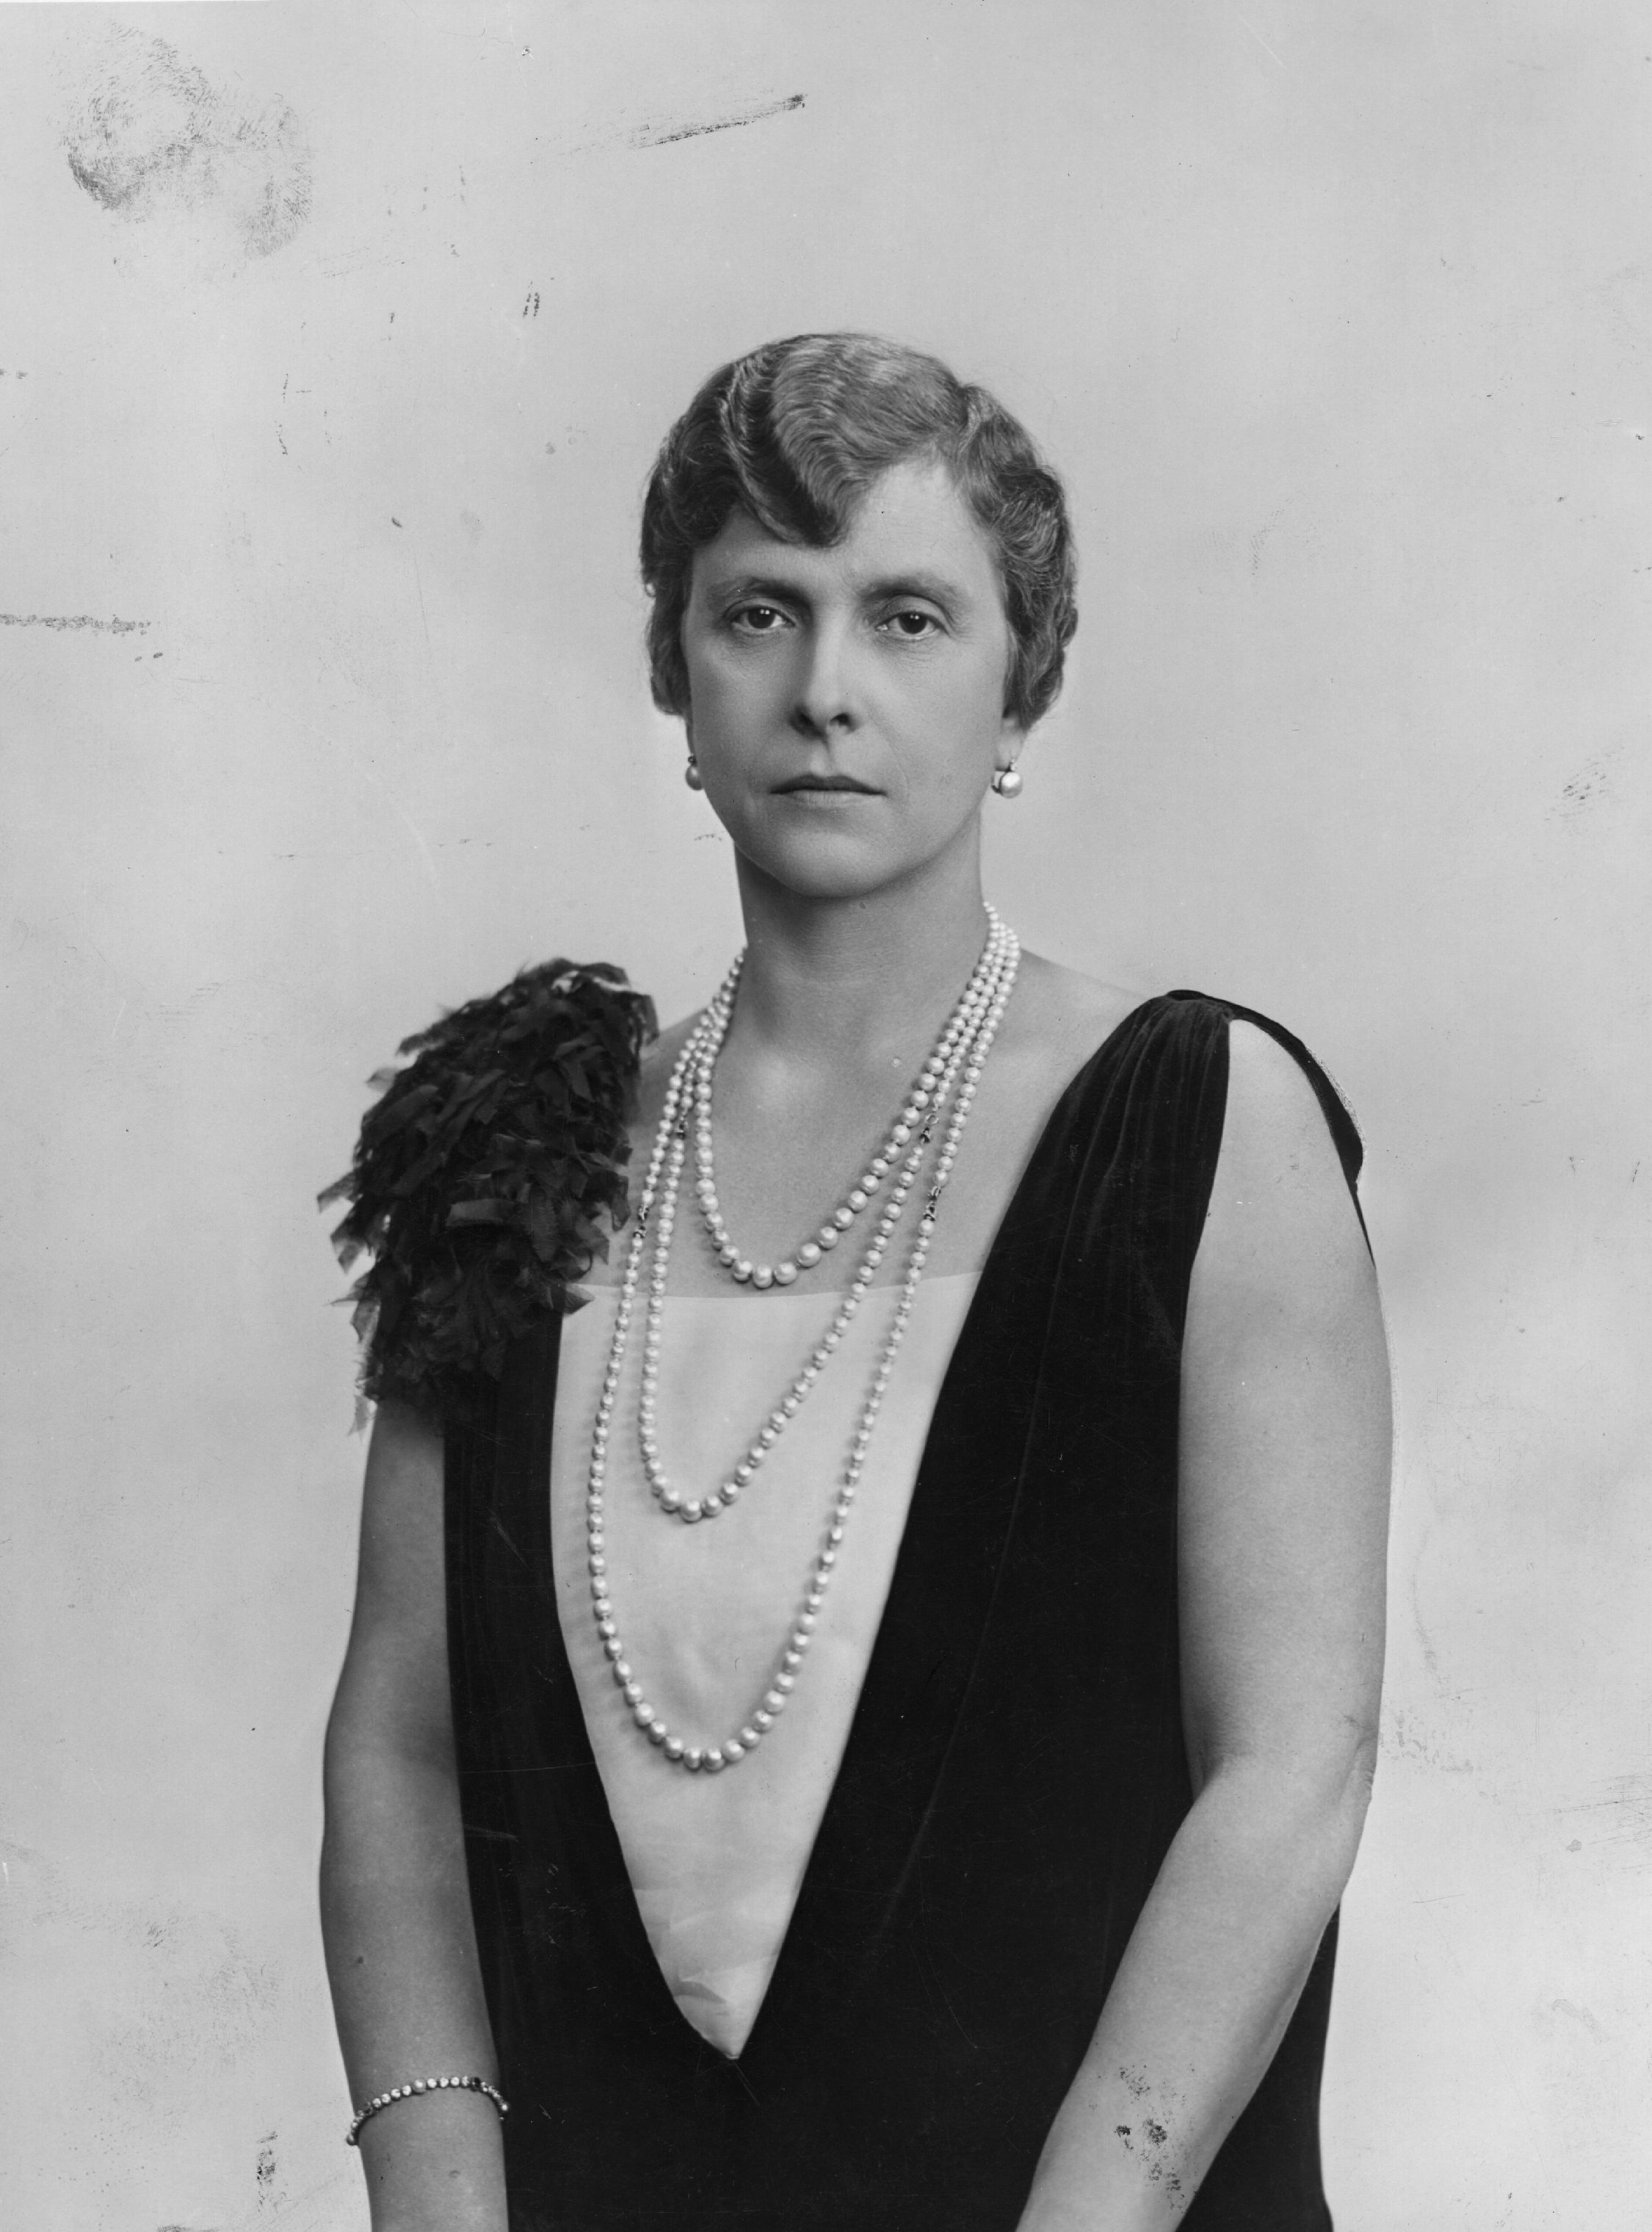 Princess Alice of Greece (1885 - 1969), mother of Prince Philip, the Duke of Edinburgh, and formerly Alice of Battenberg. | Photo: Getty Images